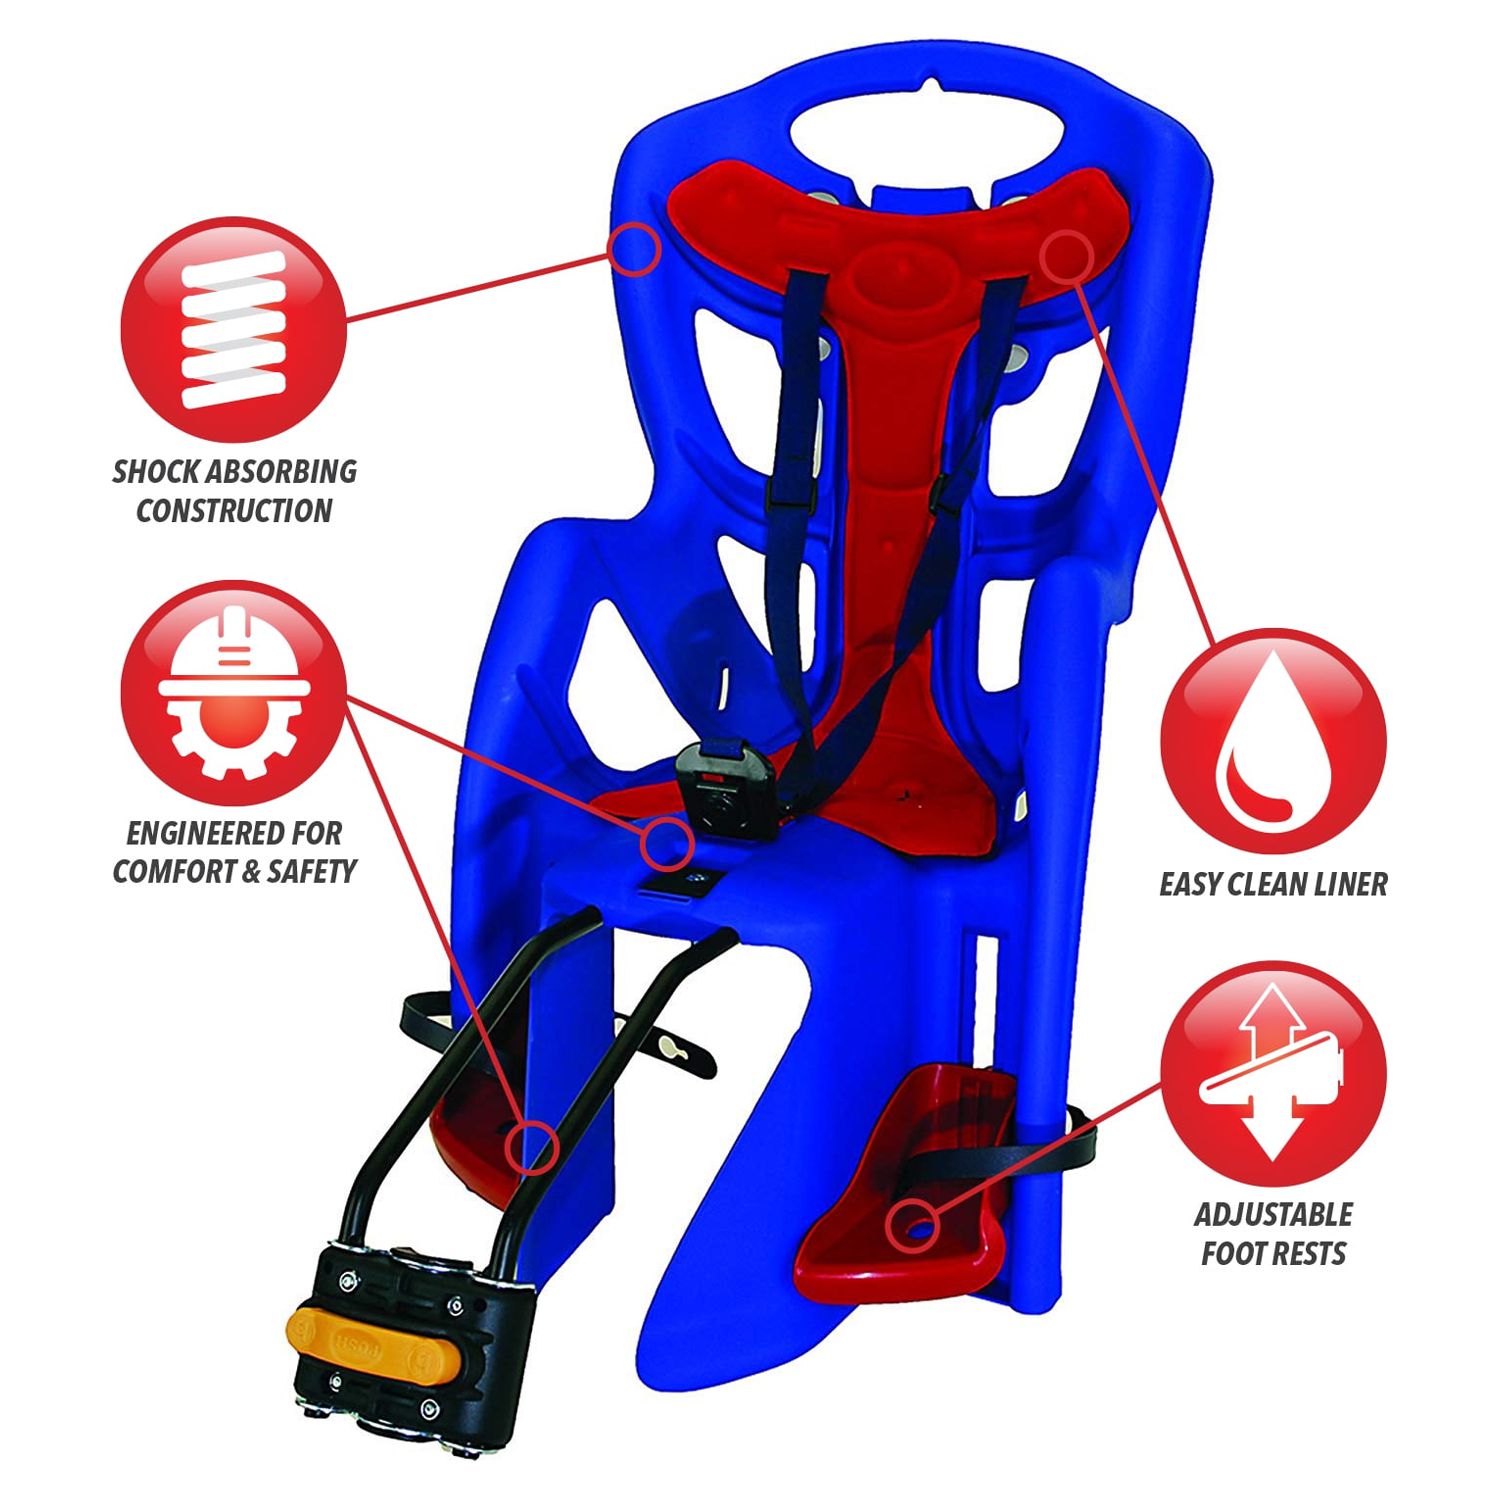 Bellelli Pepe Seatpost Mounted Baby Carrier, Red/Blue - image 3 of 5